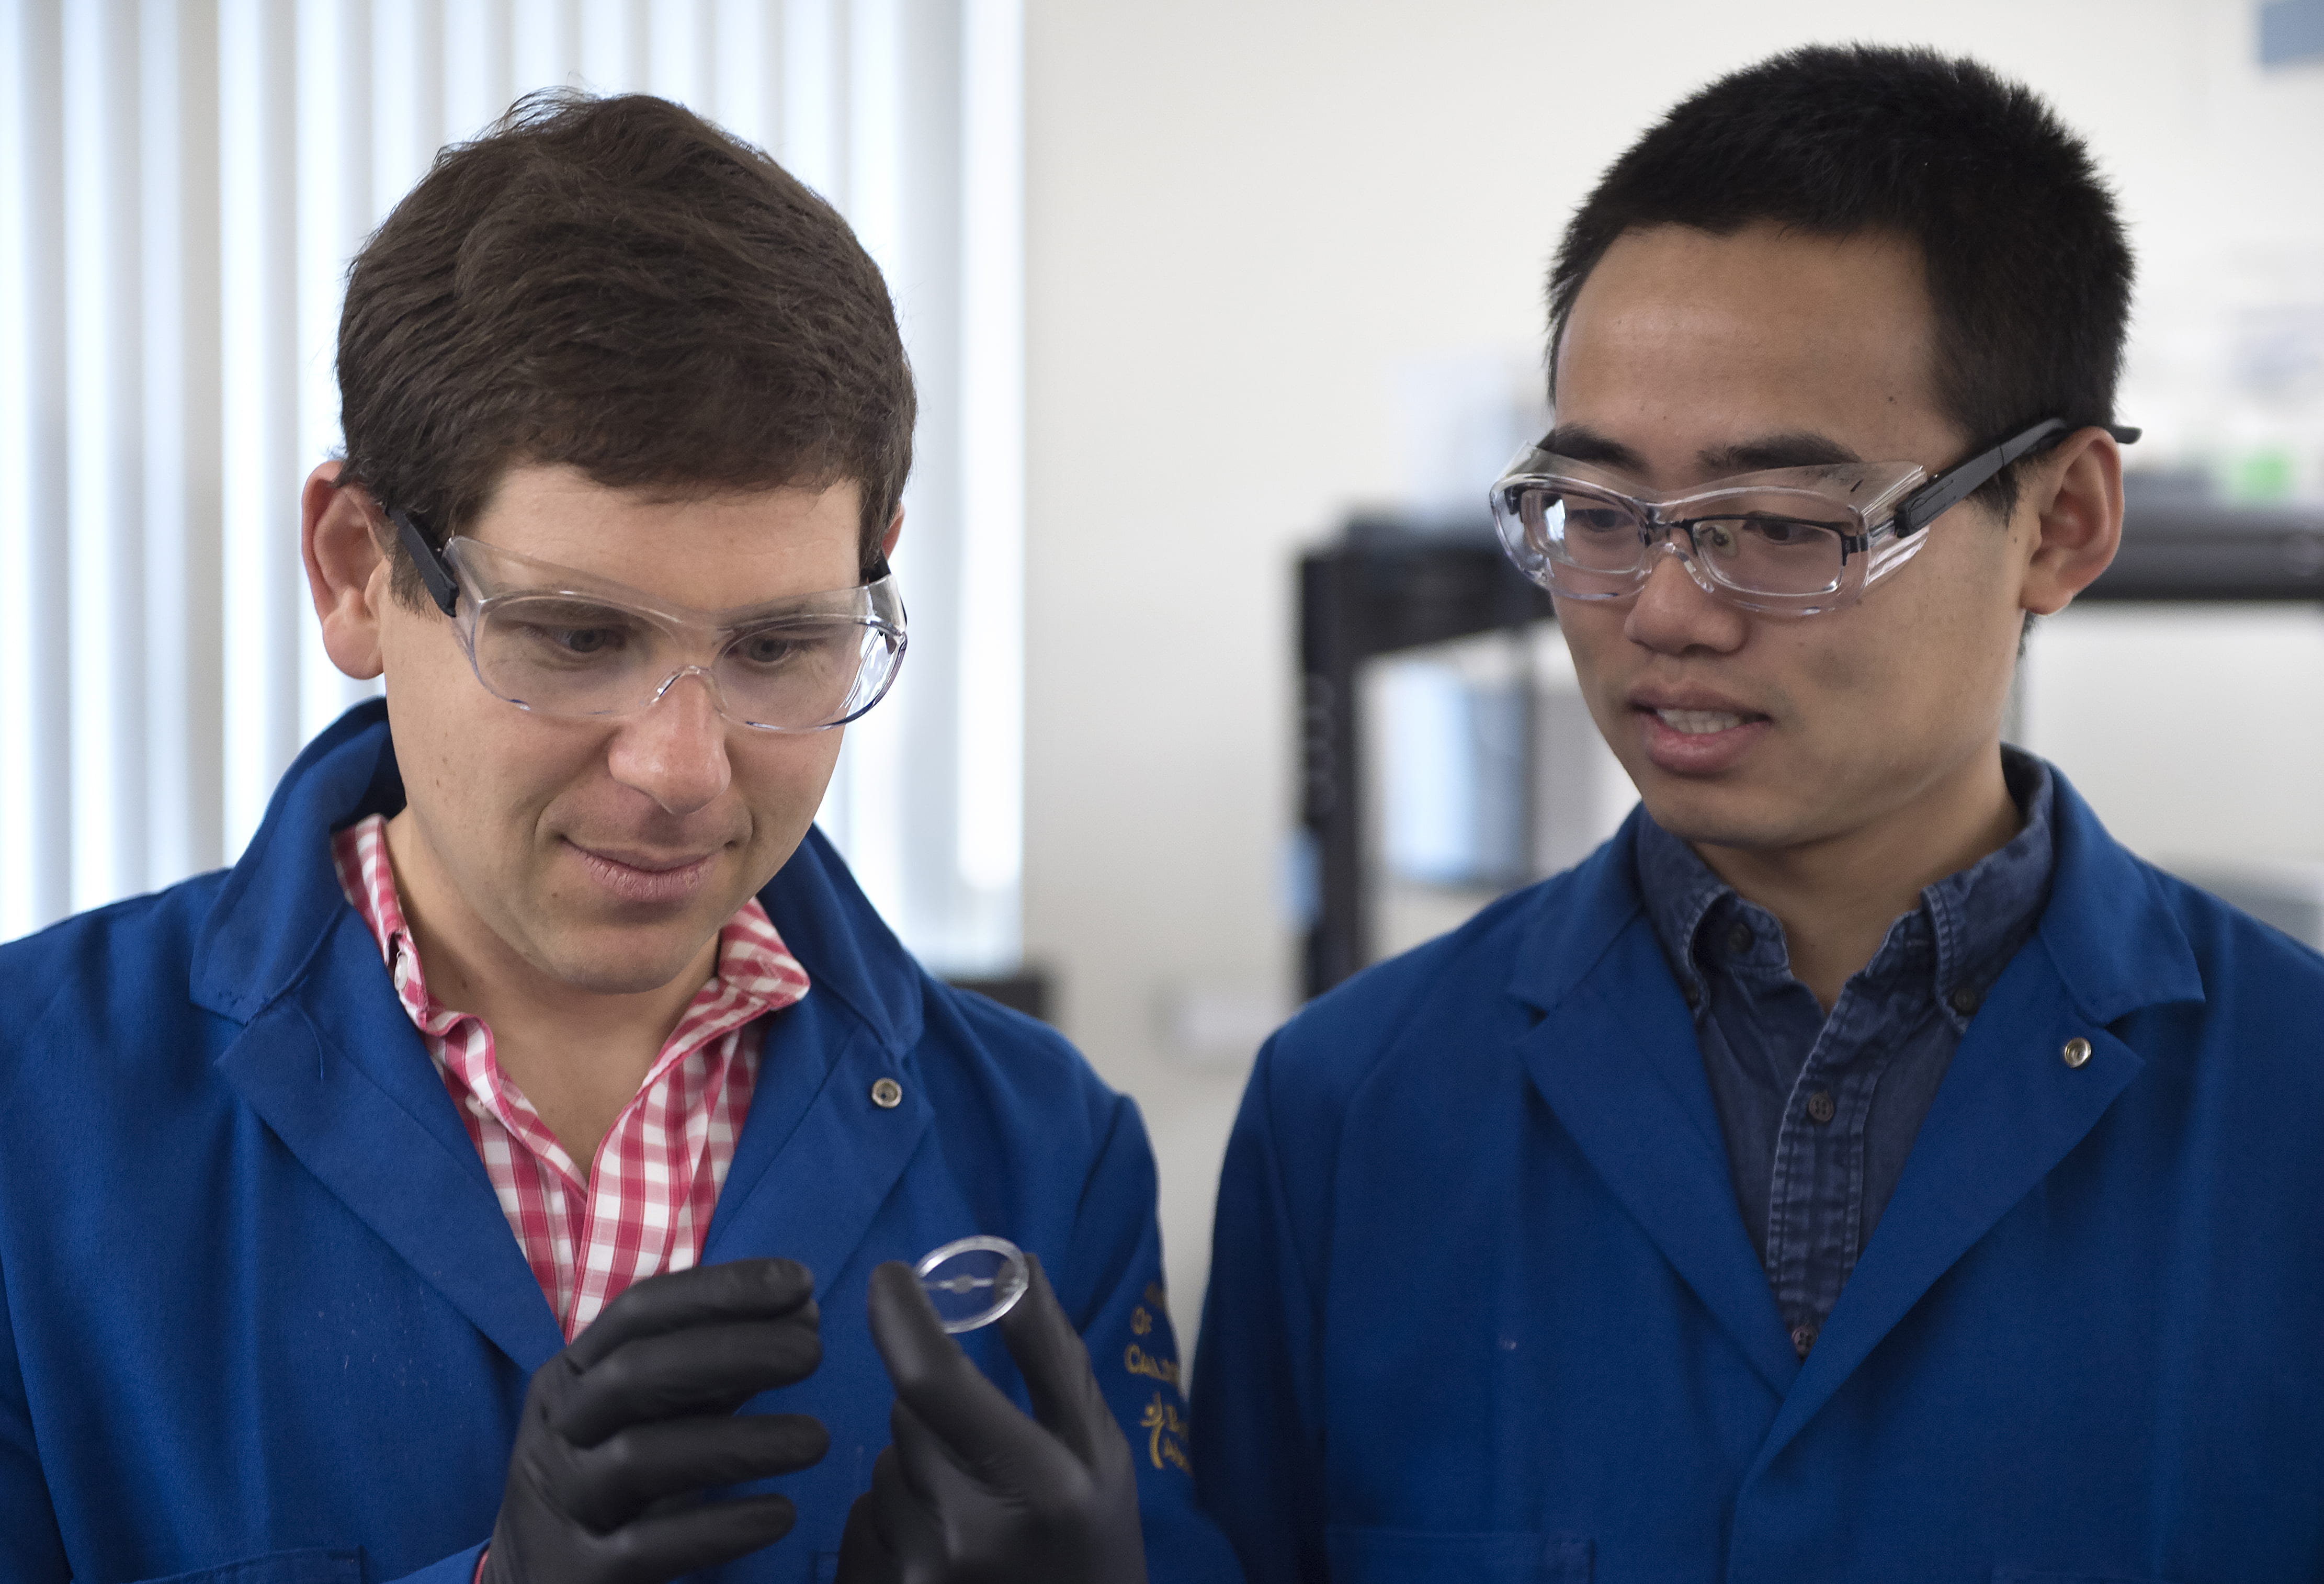 Associate Professor of Chemical Engineering & Materials Science Alon Gorodetsky and grad student Chengyi X